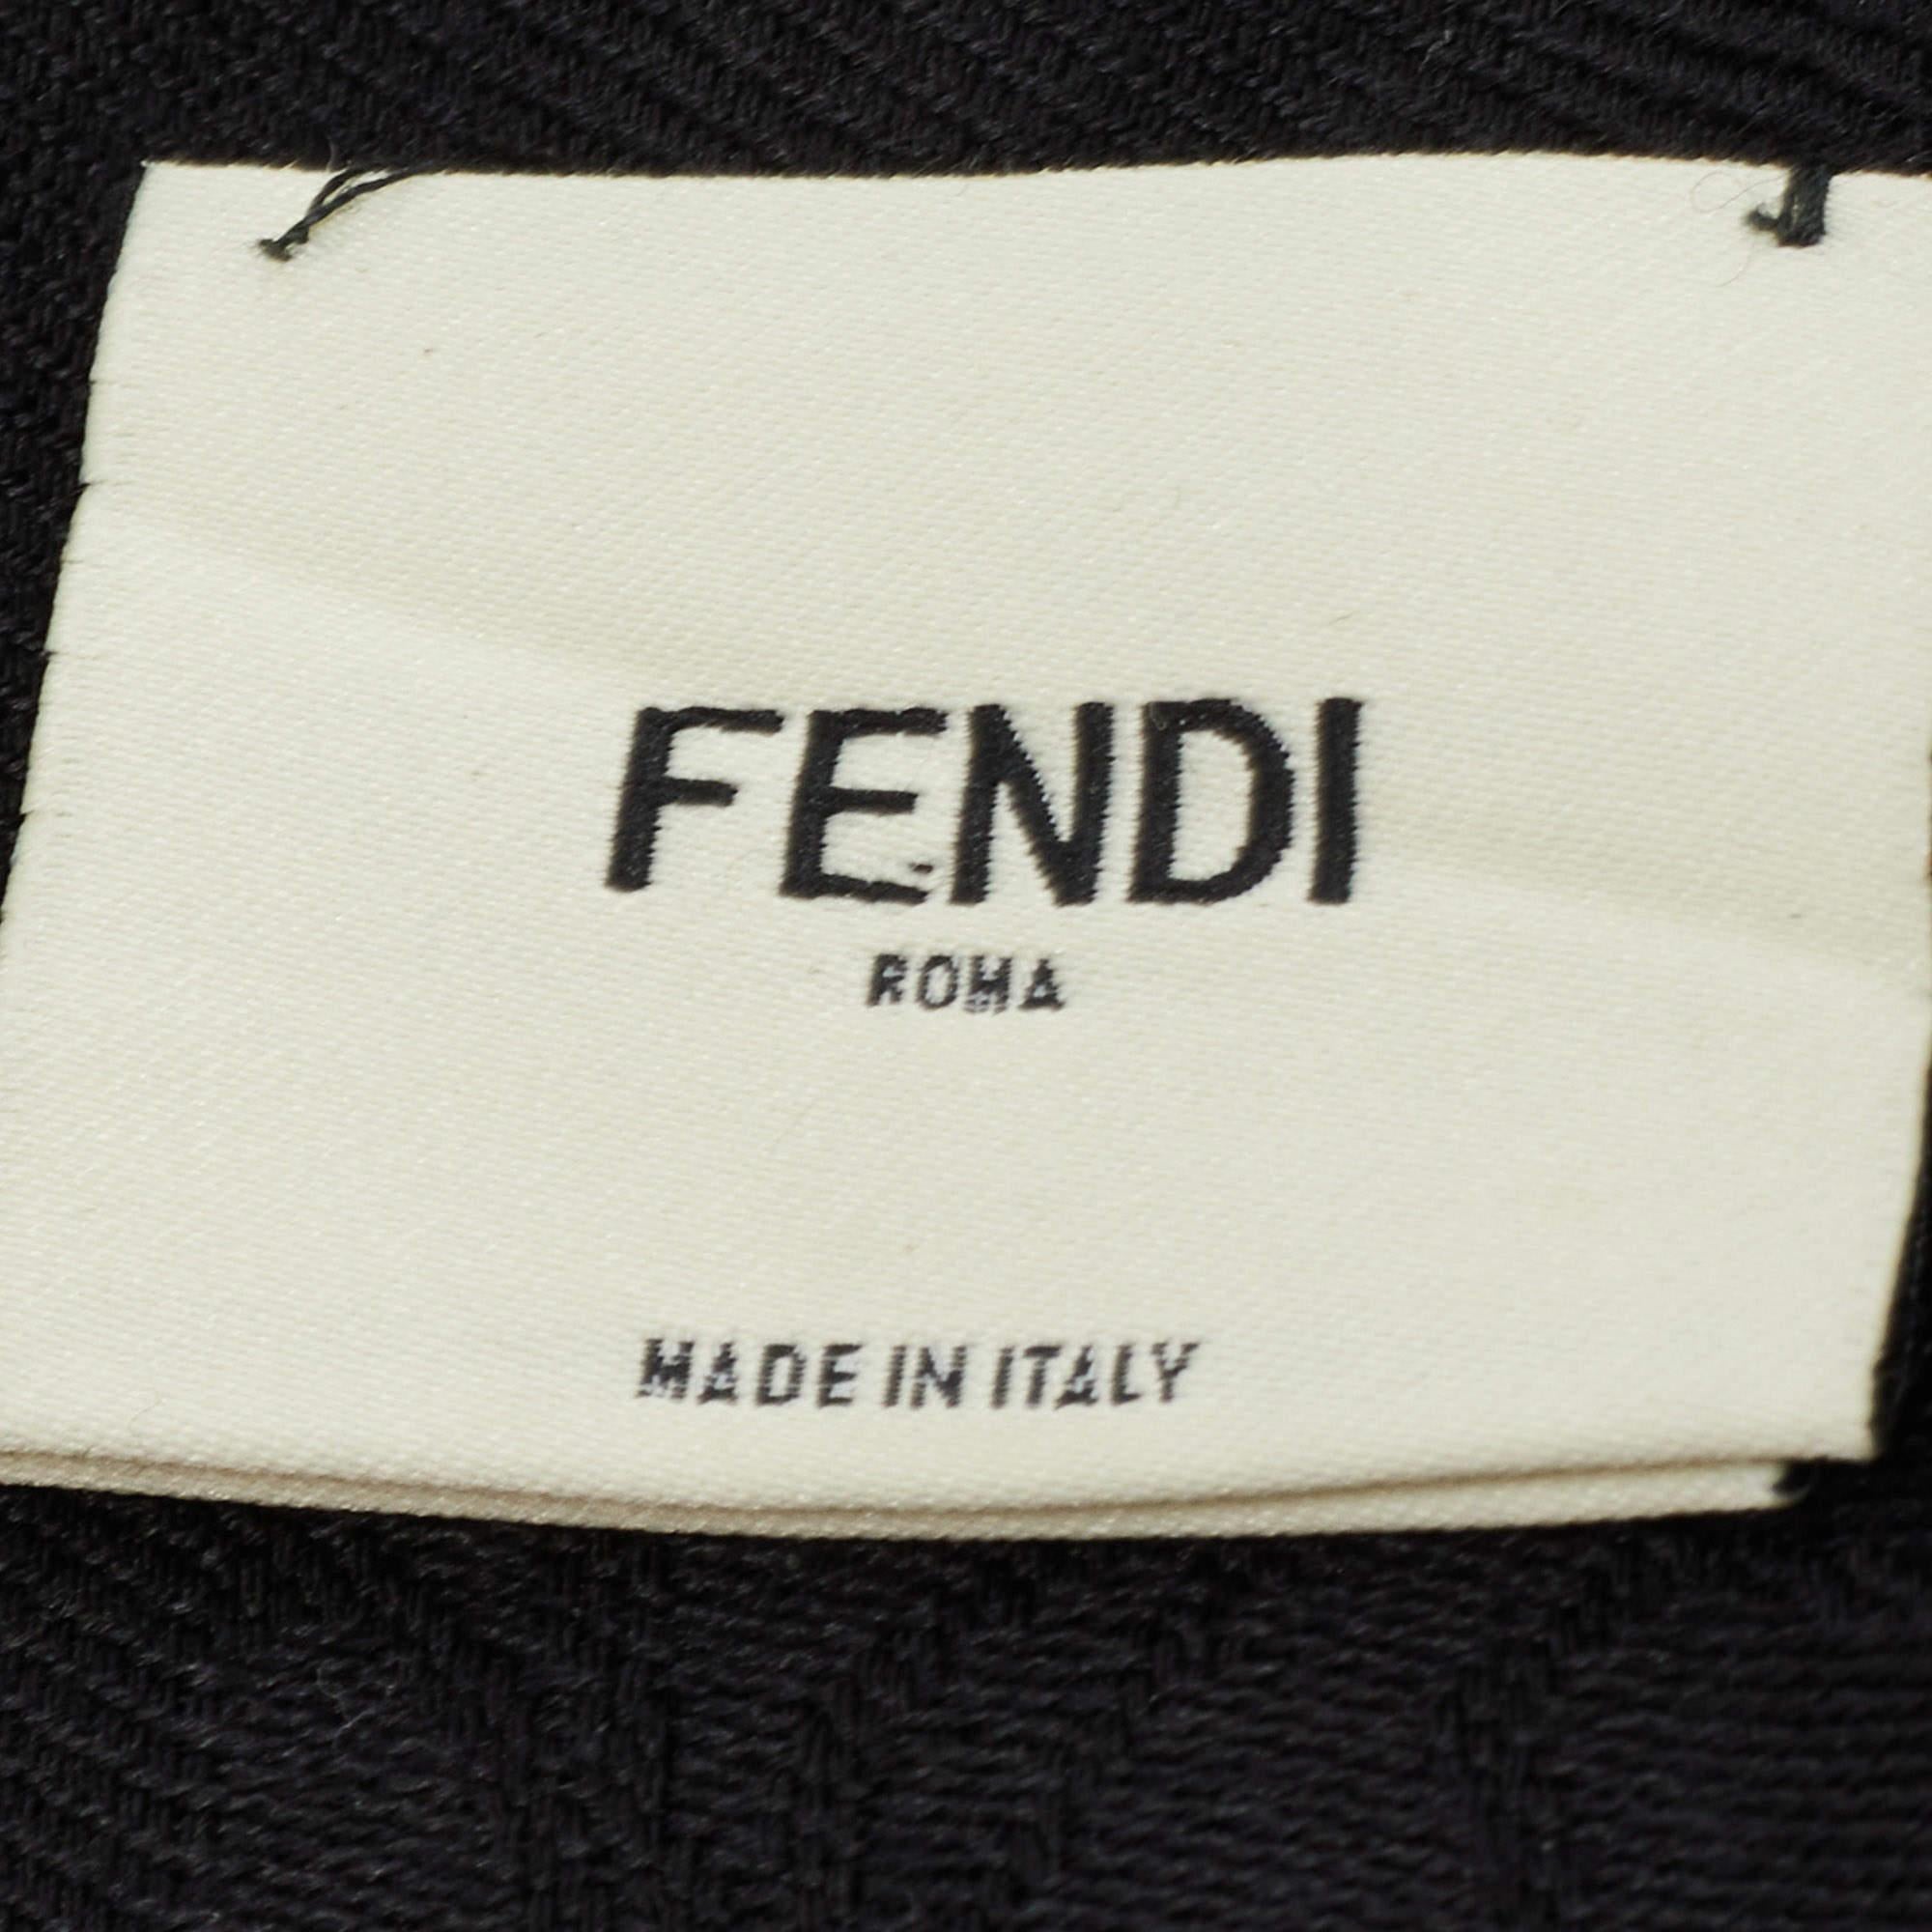 Classy and stylish are some words that come to our minds when we look at the Fendi scarf. The label brings you this versatile creation made from luxurious materials that you style with many outfits.

